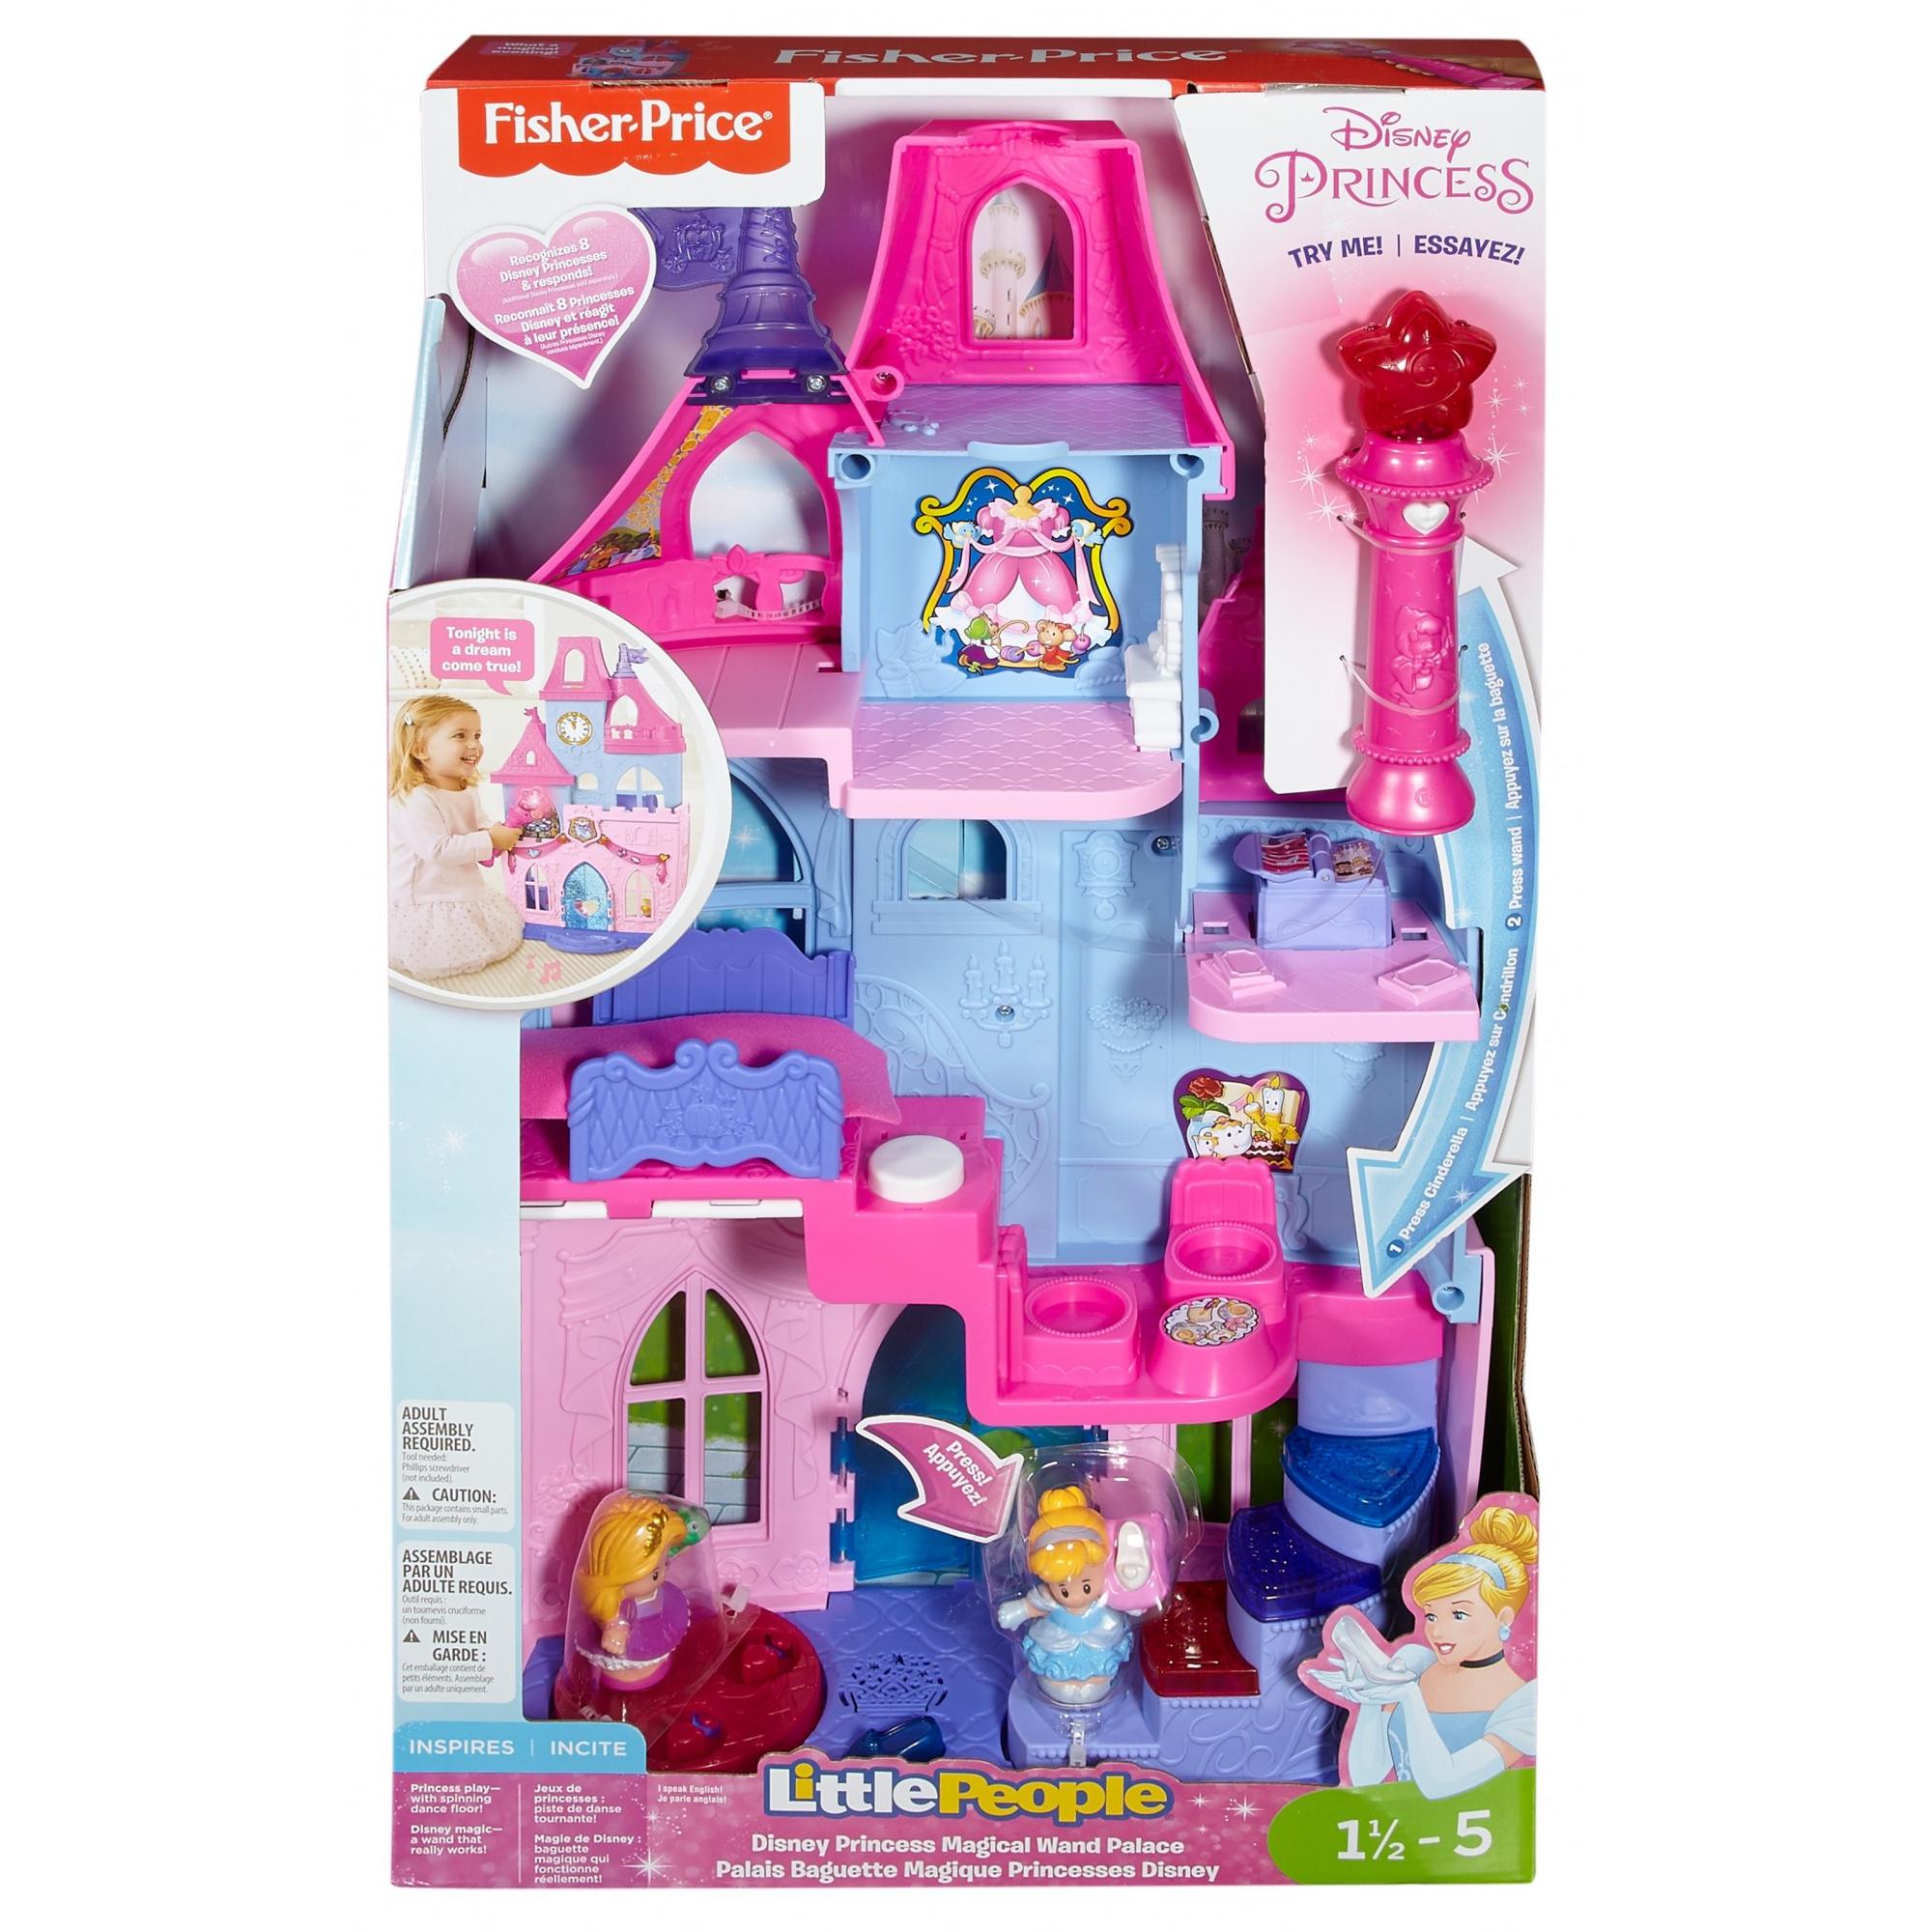 Little People Fisher-Price Disney Princess Magical Wand Palace Doll Playset - image 3 of 4